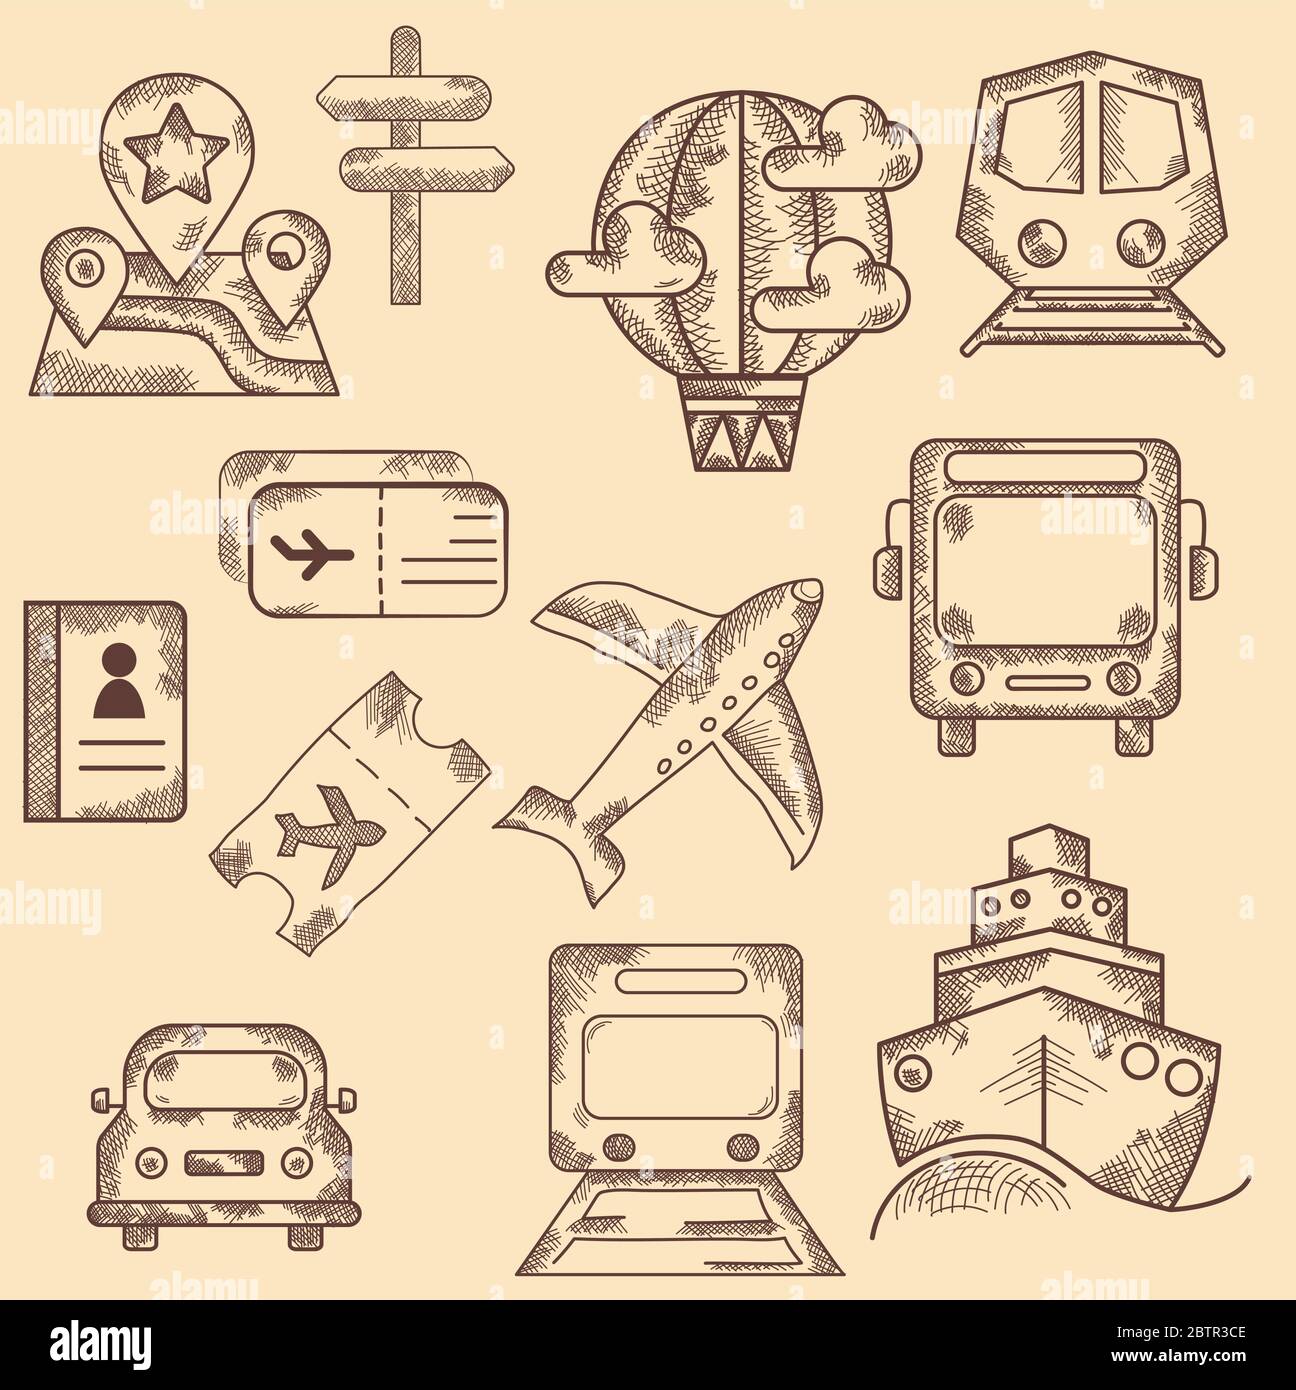 Hand drawn icon set. Transport, travel and road. Vintage. Hand held doodle illustration. Stock Vector